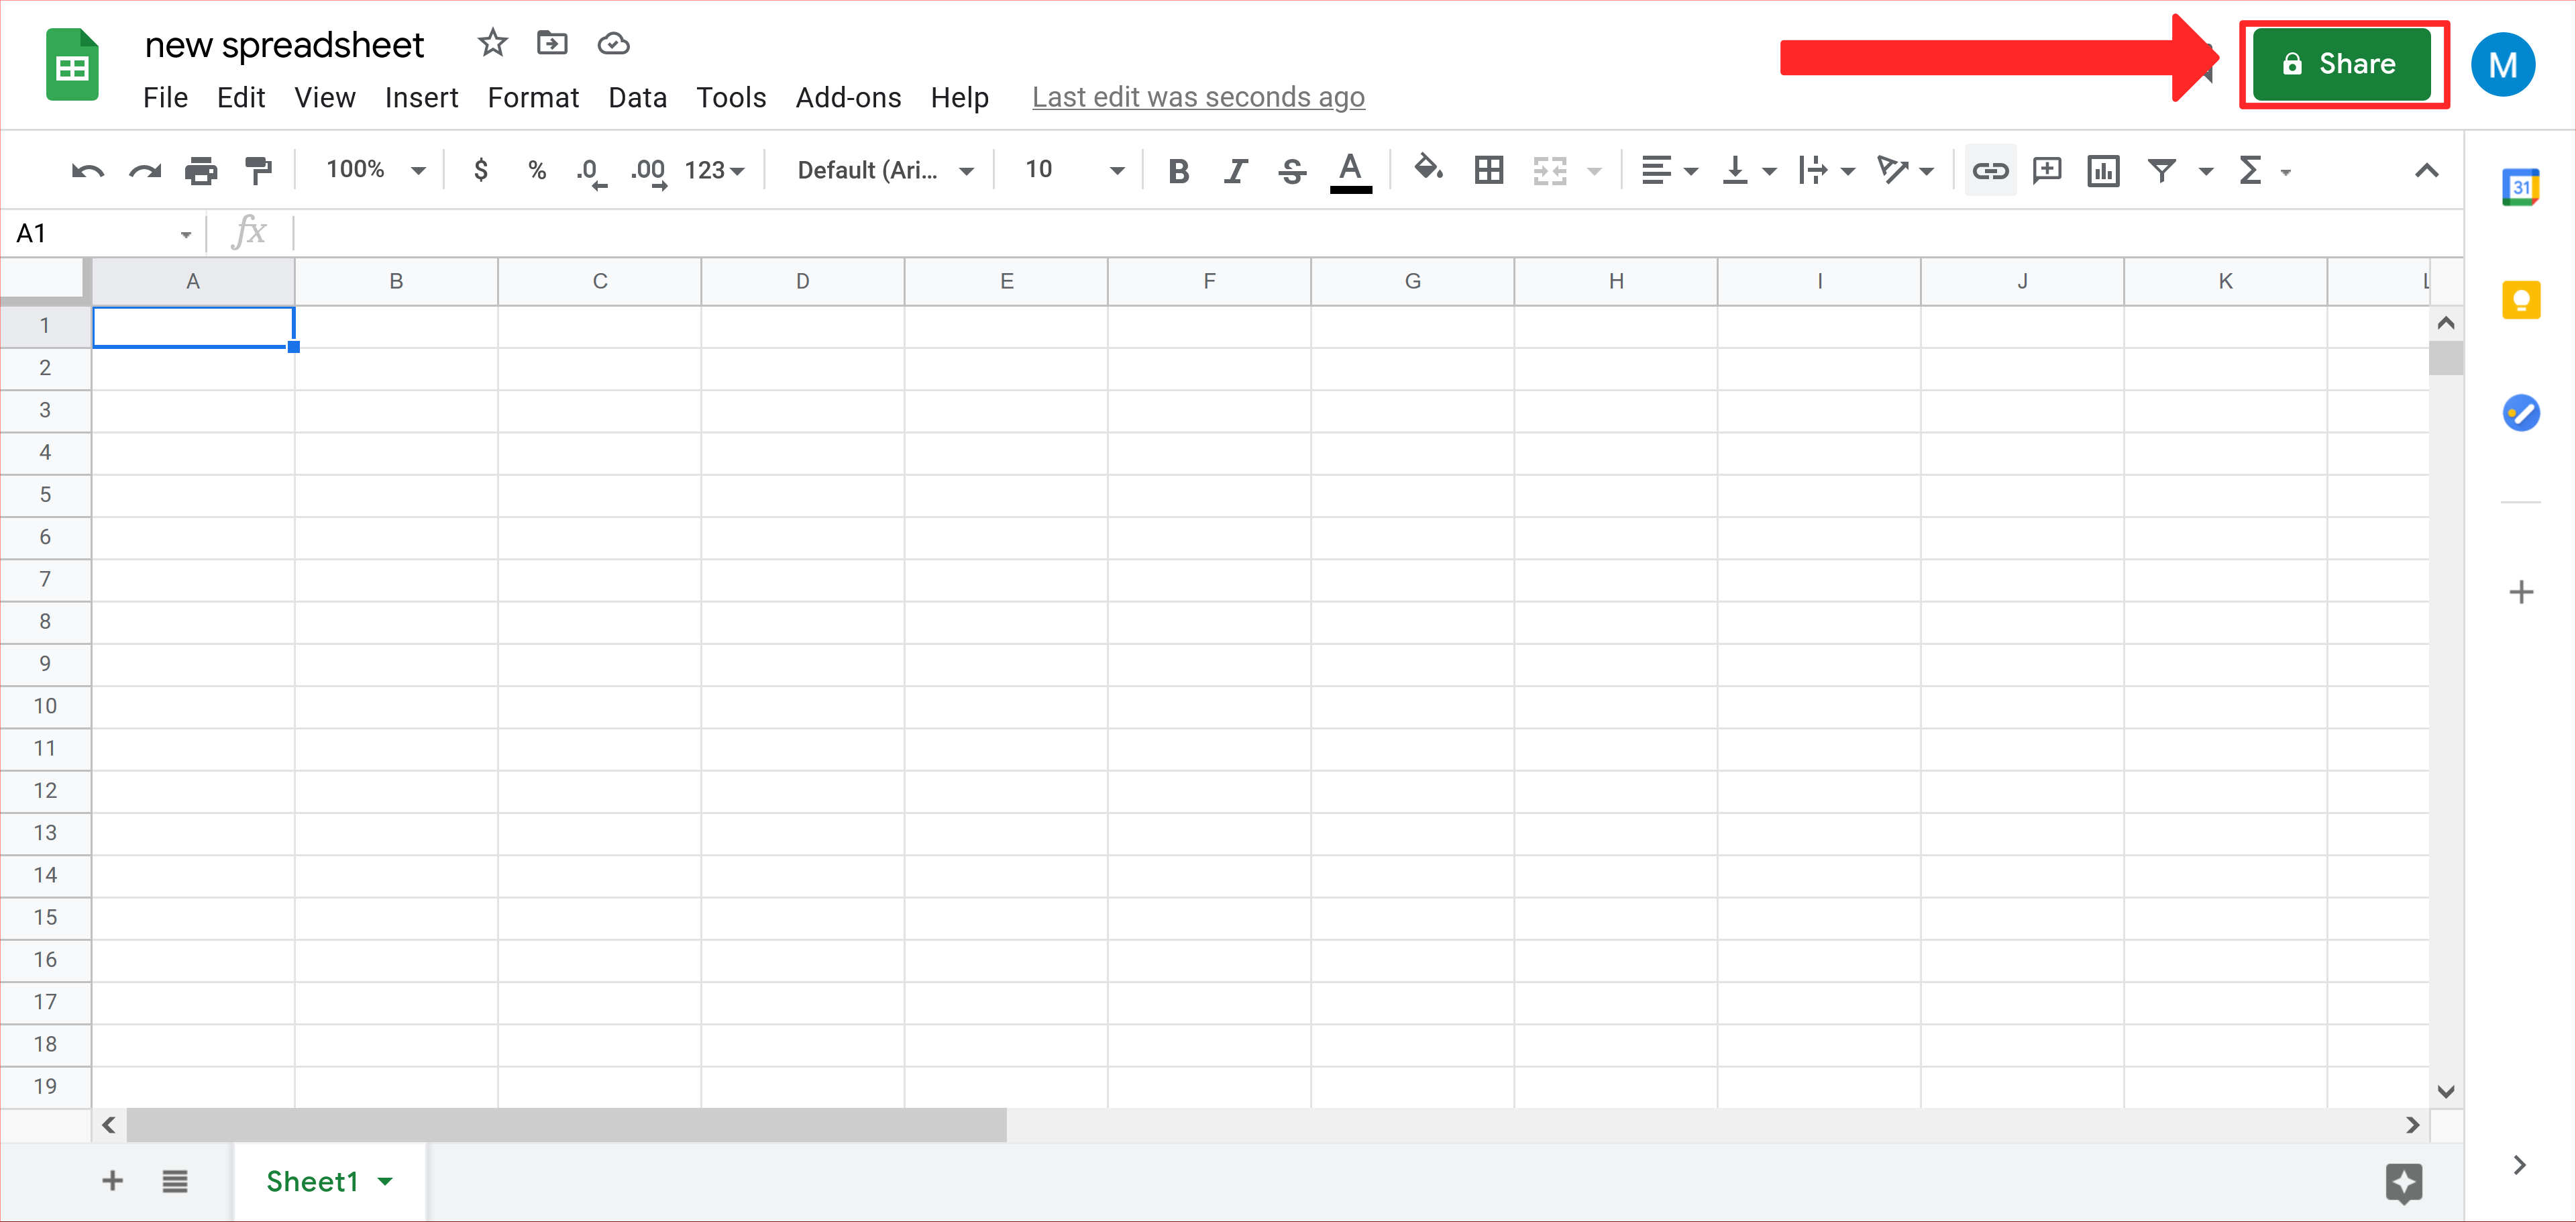 Image of blank Google spreadsheet with highlighted "Share" button